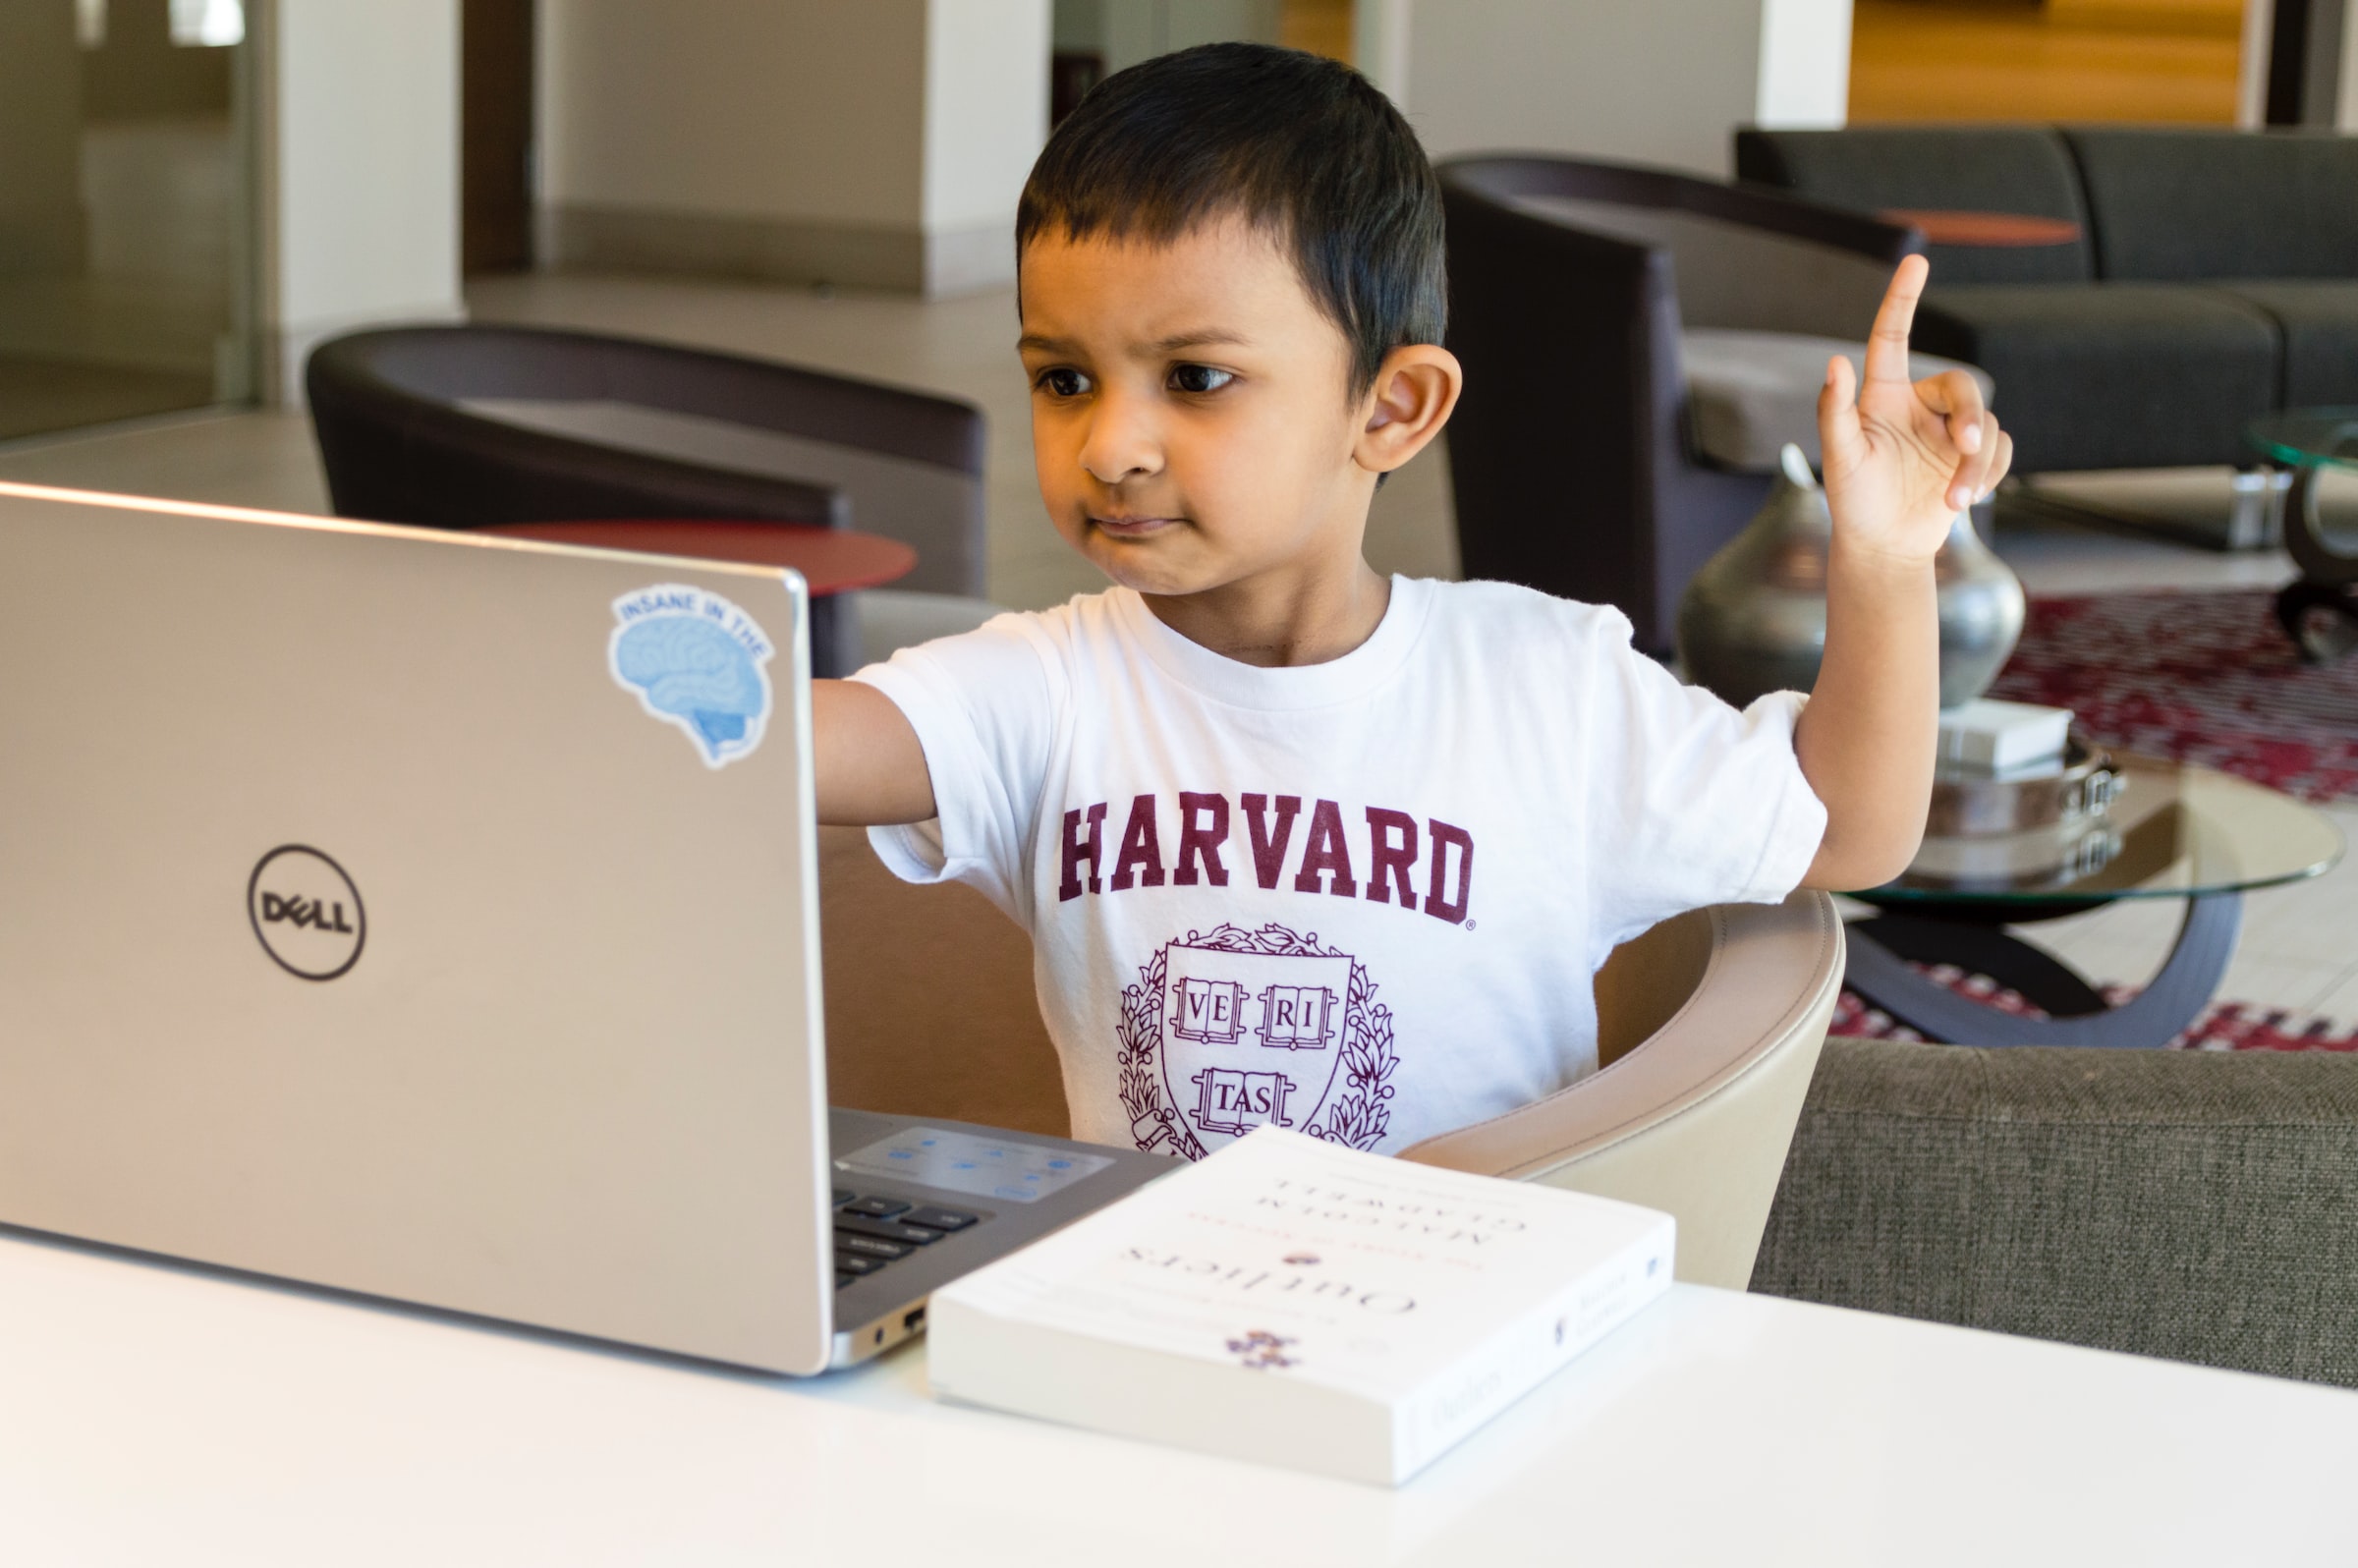 A child is wearing a white T-shirt, watching something in a gray Dell laptop, he is also raising his left hand.